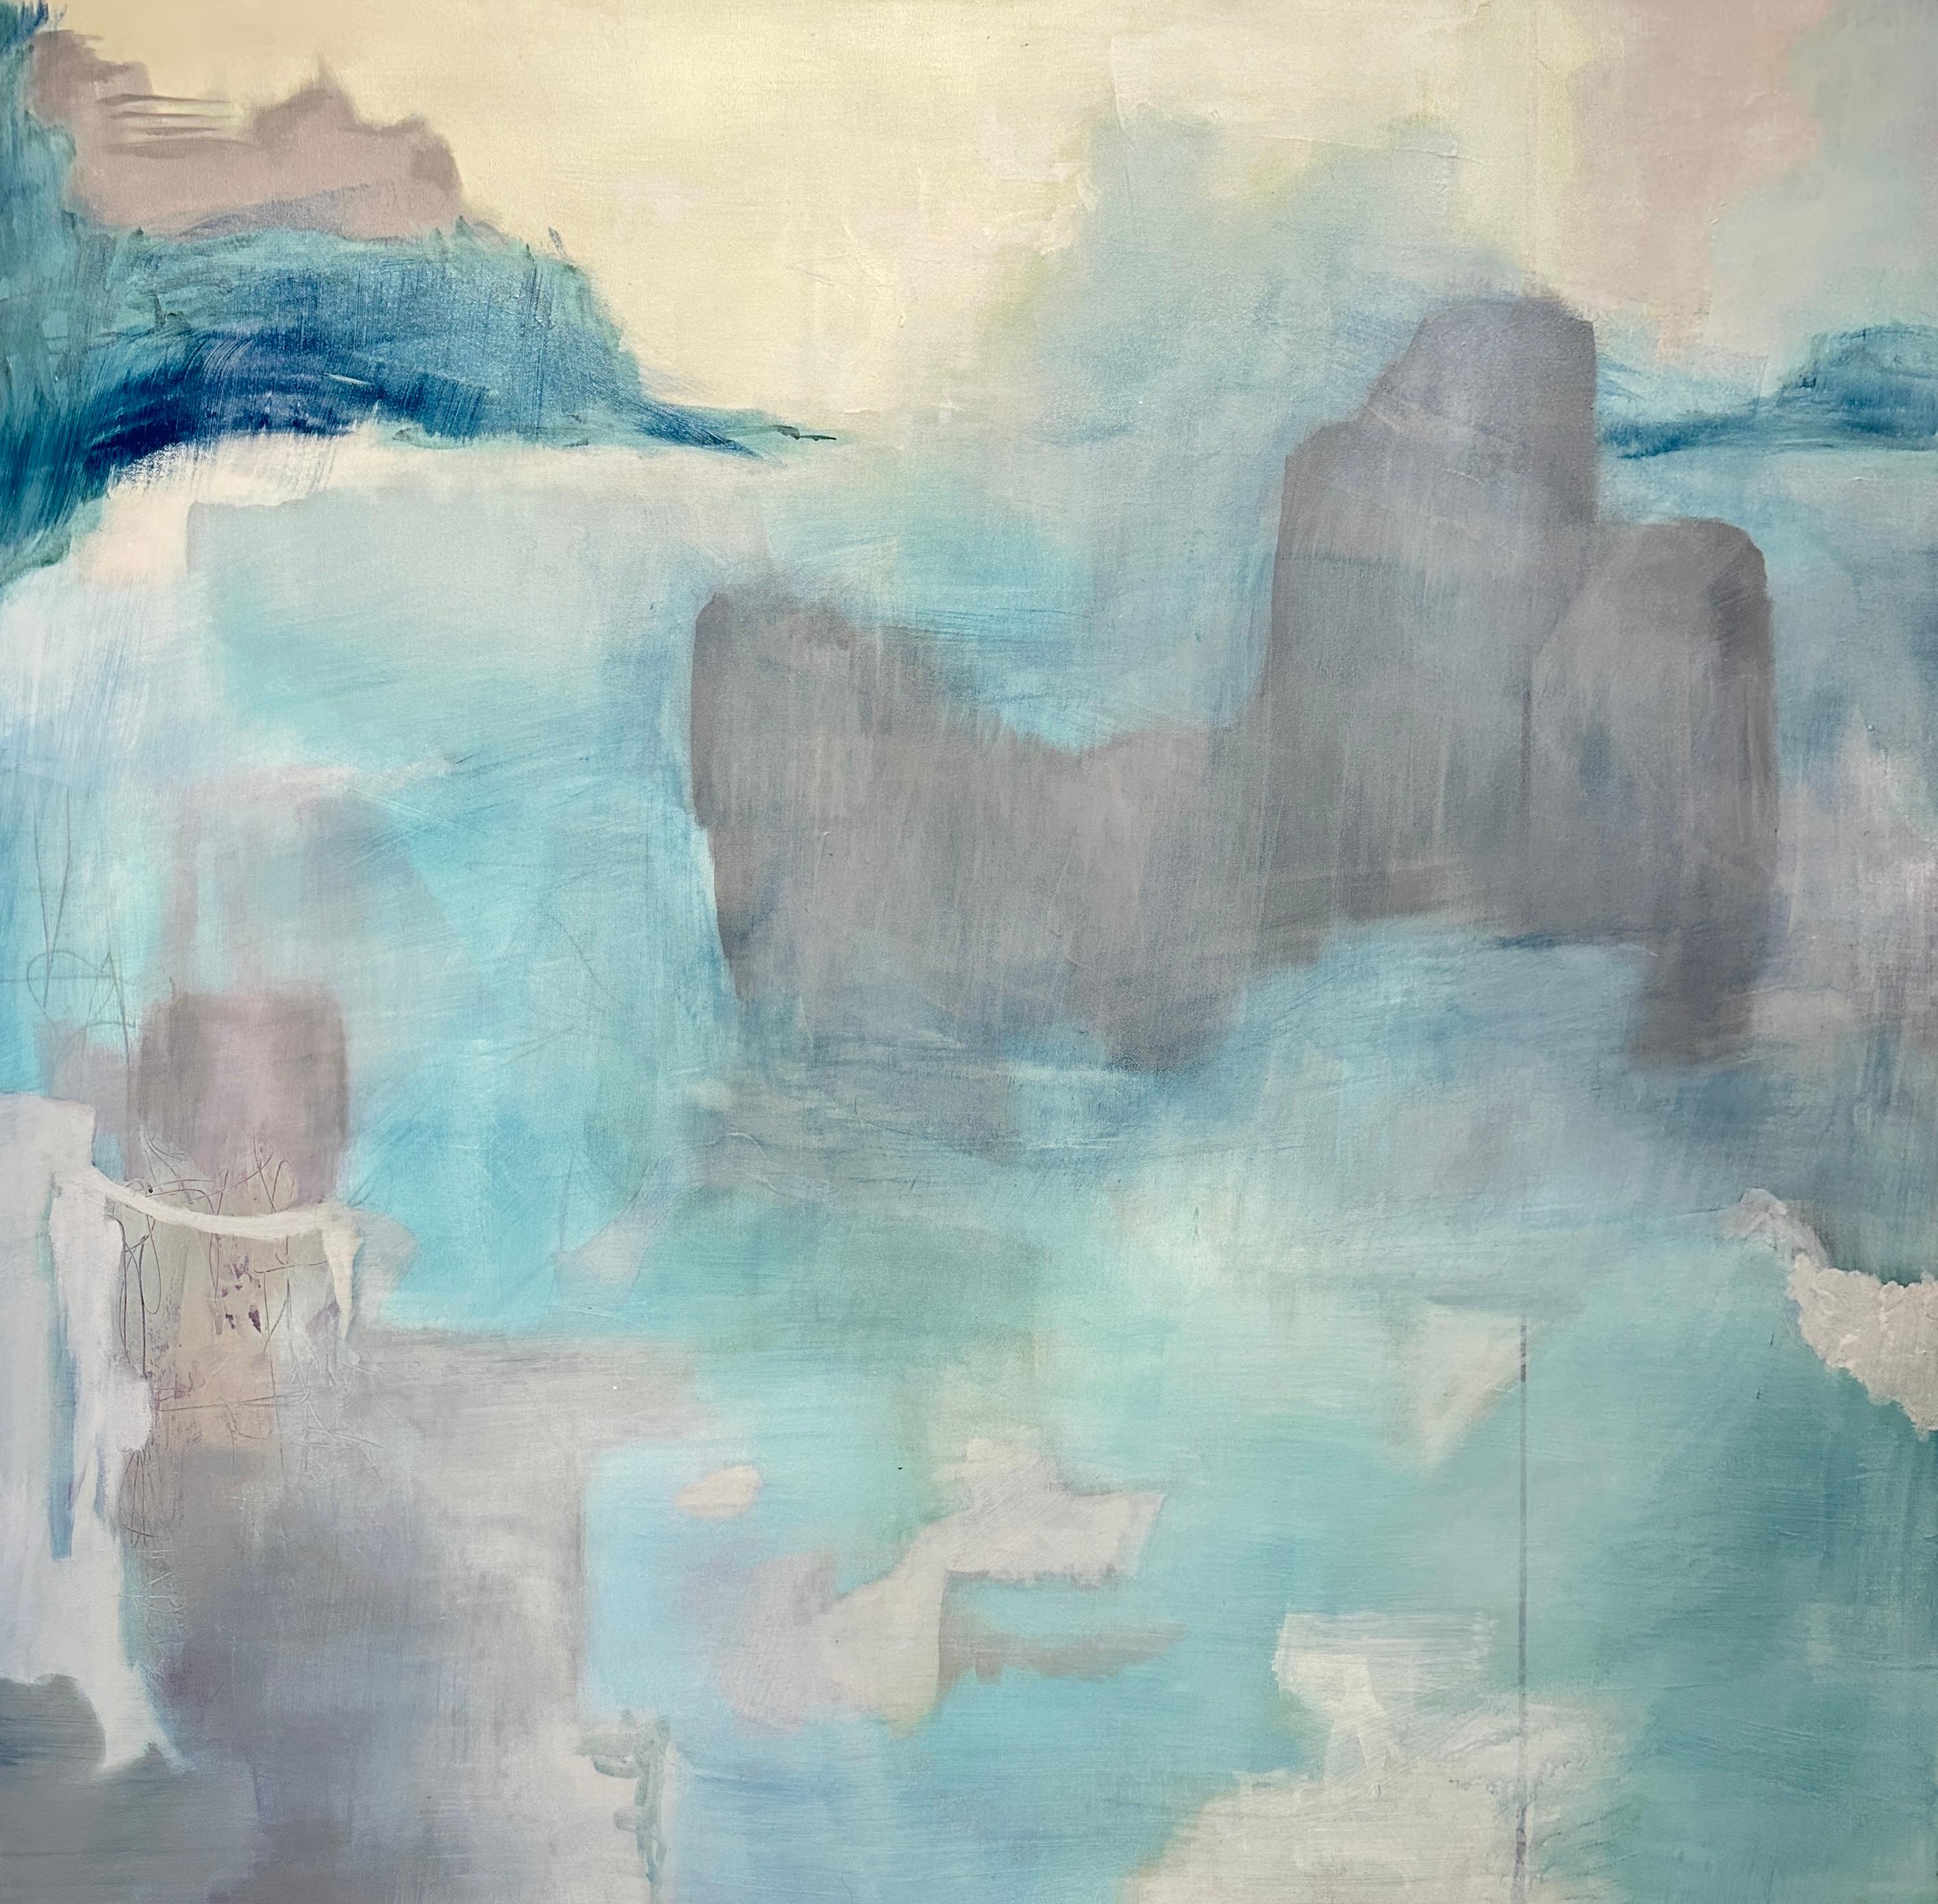 A Misty Bay, ocean, teal, white, cliffs, rock formation - Painting by Juanita Bellavance 